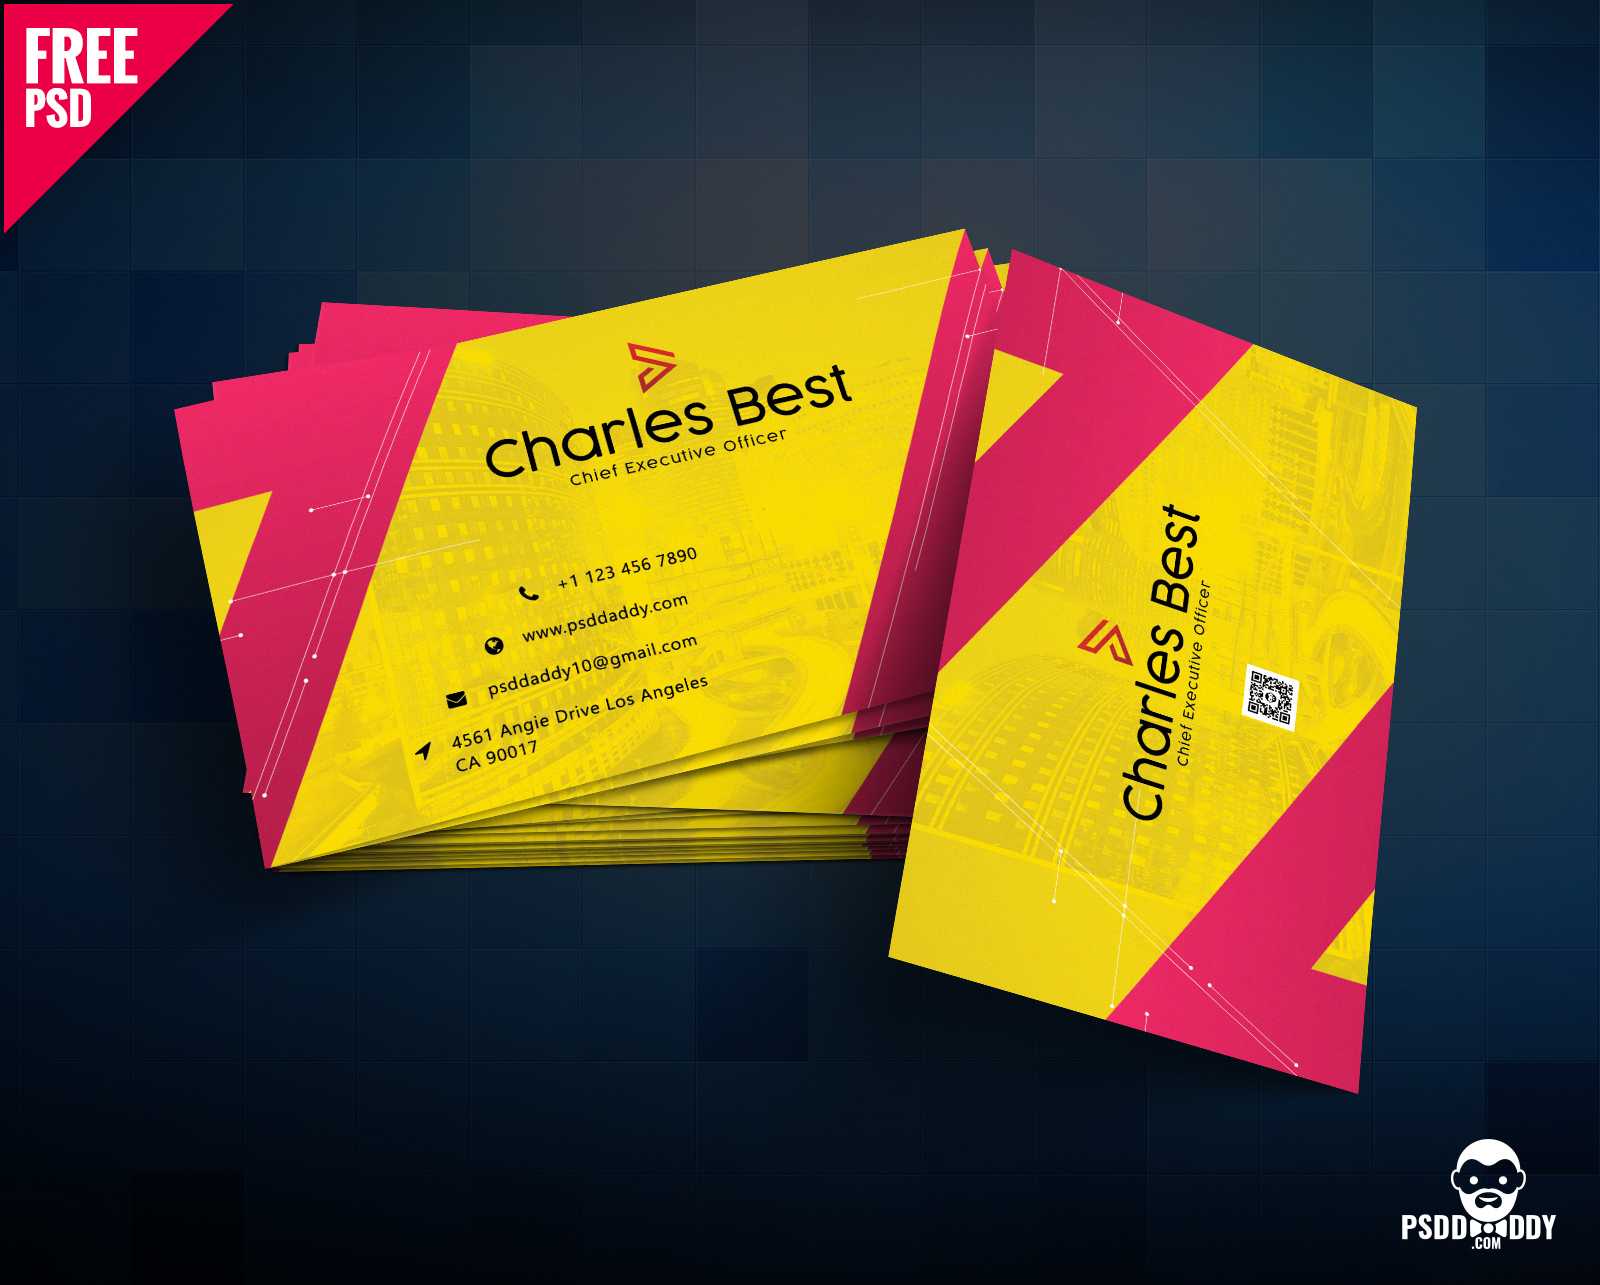 Download] Creative Business Card Free Psd | Psddaddy For Psd Visiting Card Templates